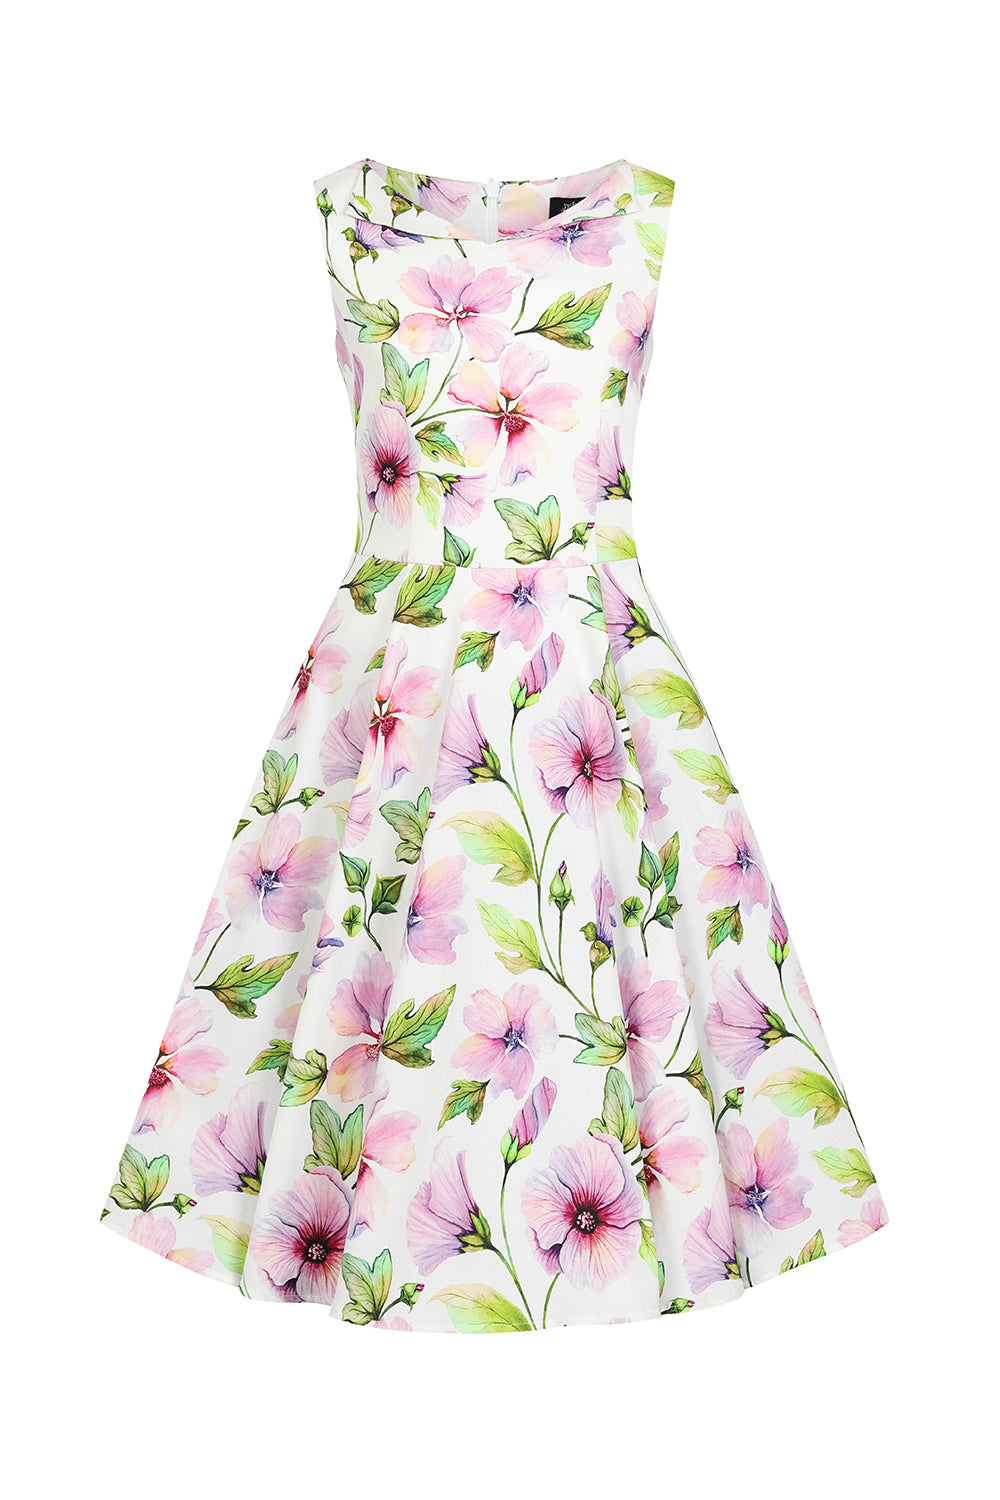 Girls Naomi Floral Swing Dress by Hearts and Roses